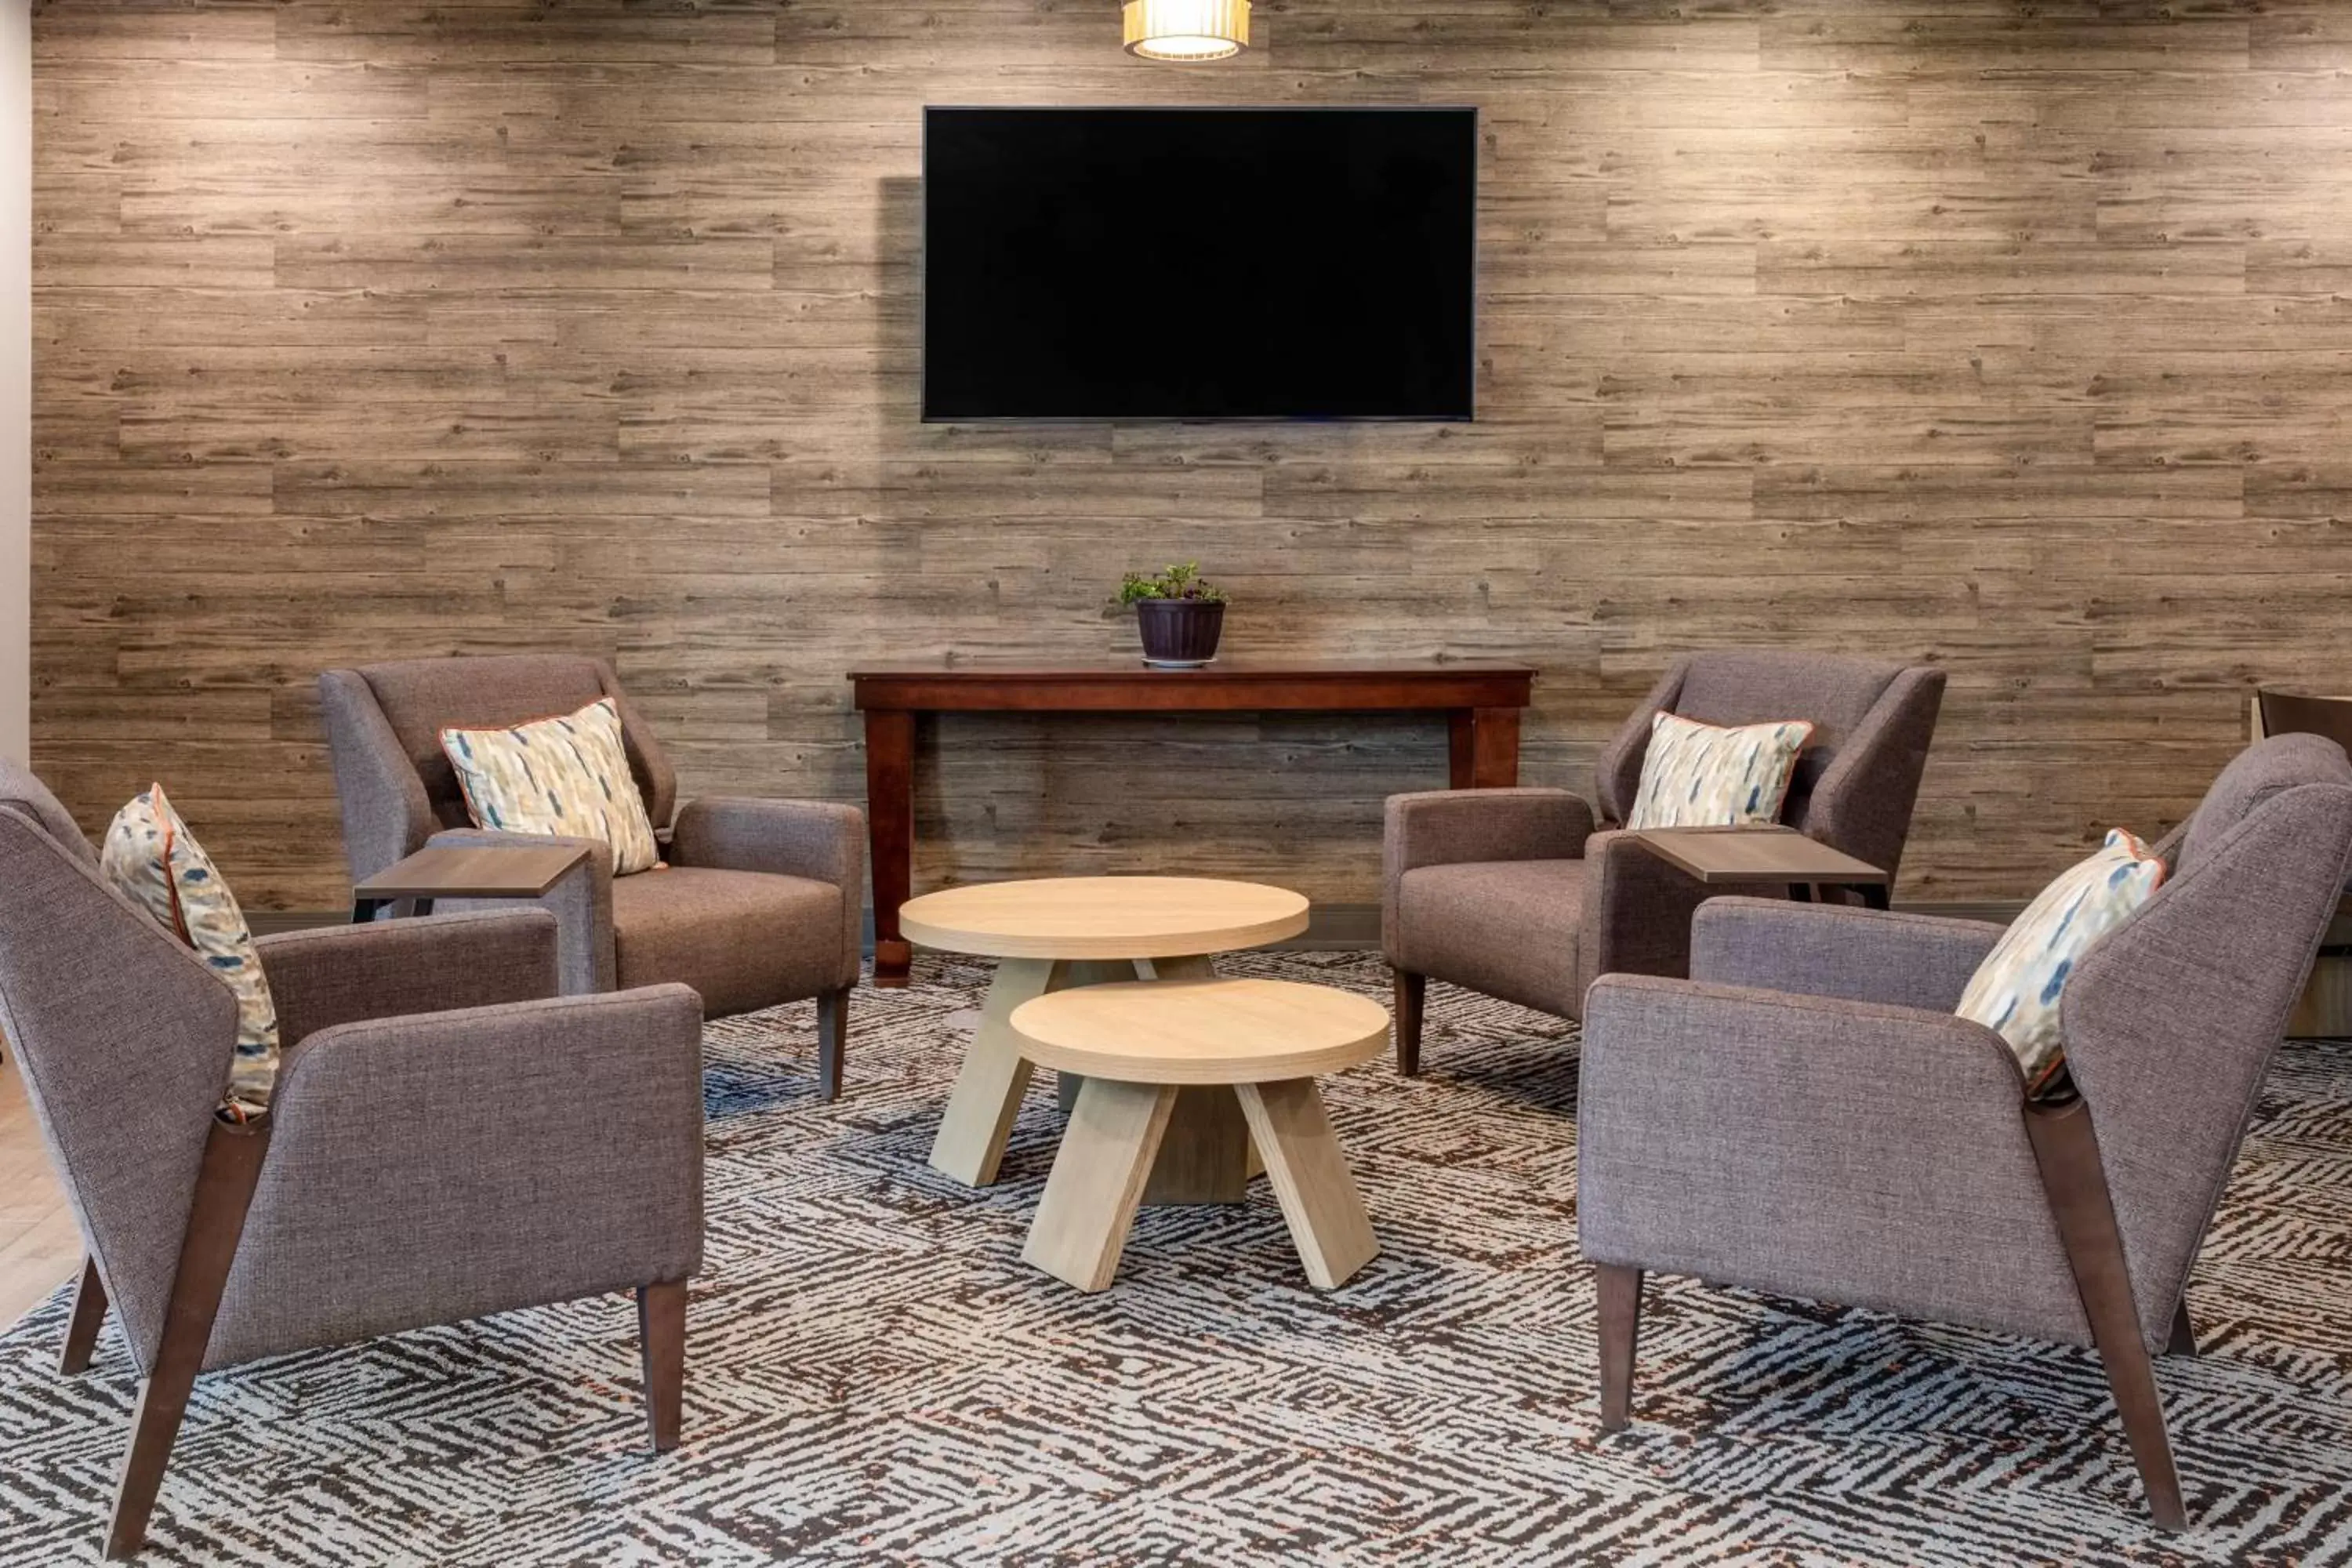 Property building, TV/Entertainment Center in Candlewood Suites Sioux Falls, an IHG Hotel